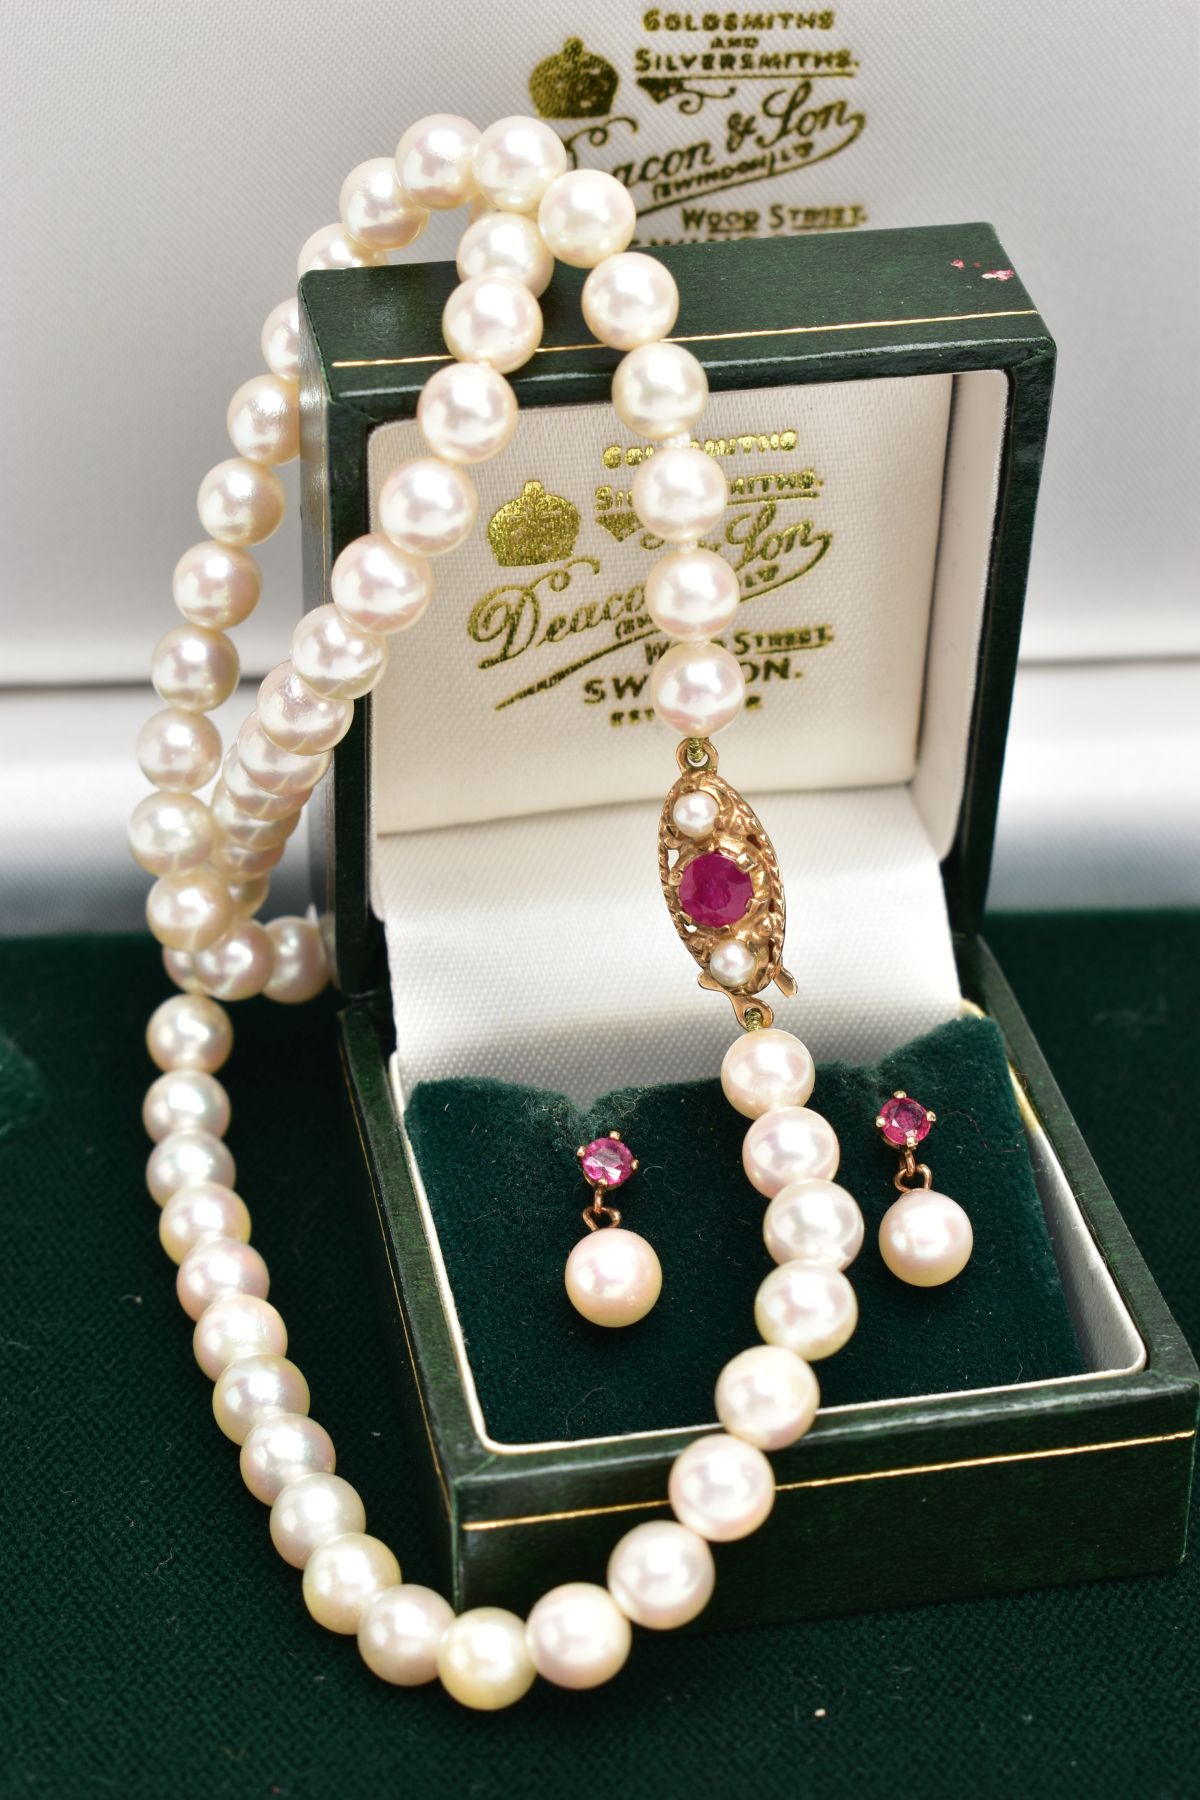 A STRAND OF CULTURED PEARLS AND PAIR OF CULTURED PEARL EARRINGS, sixty five white pearls, each